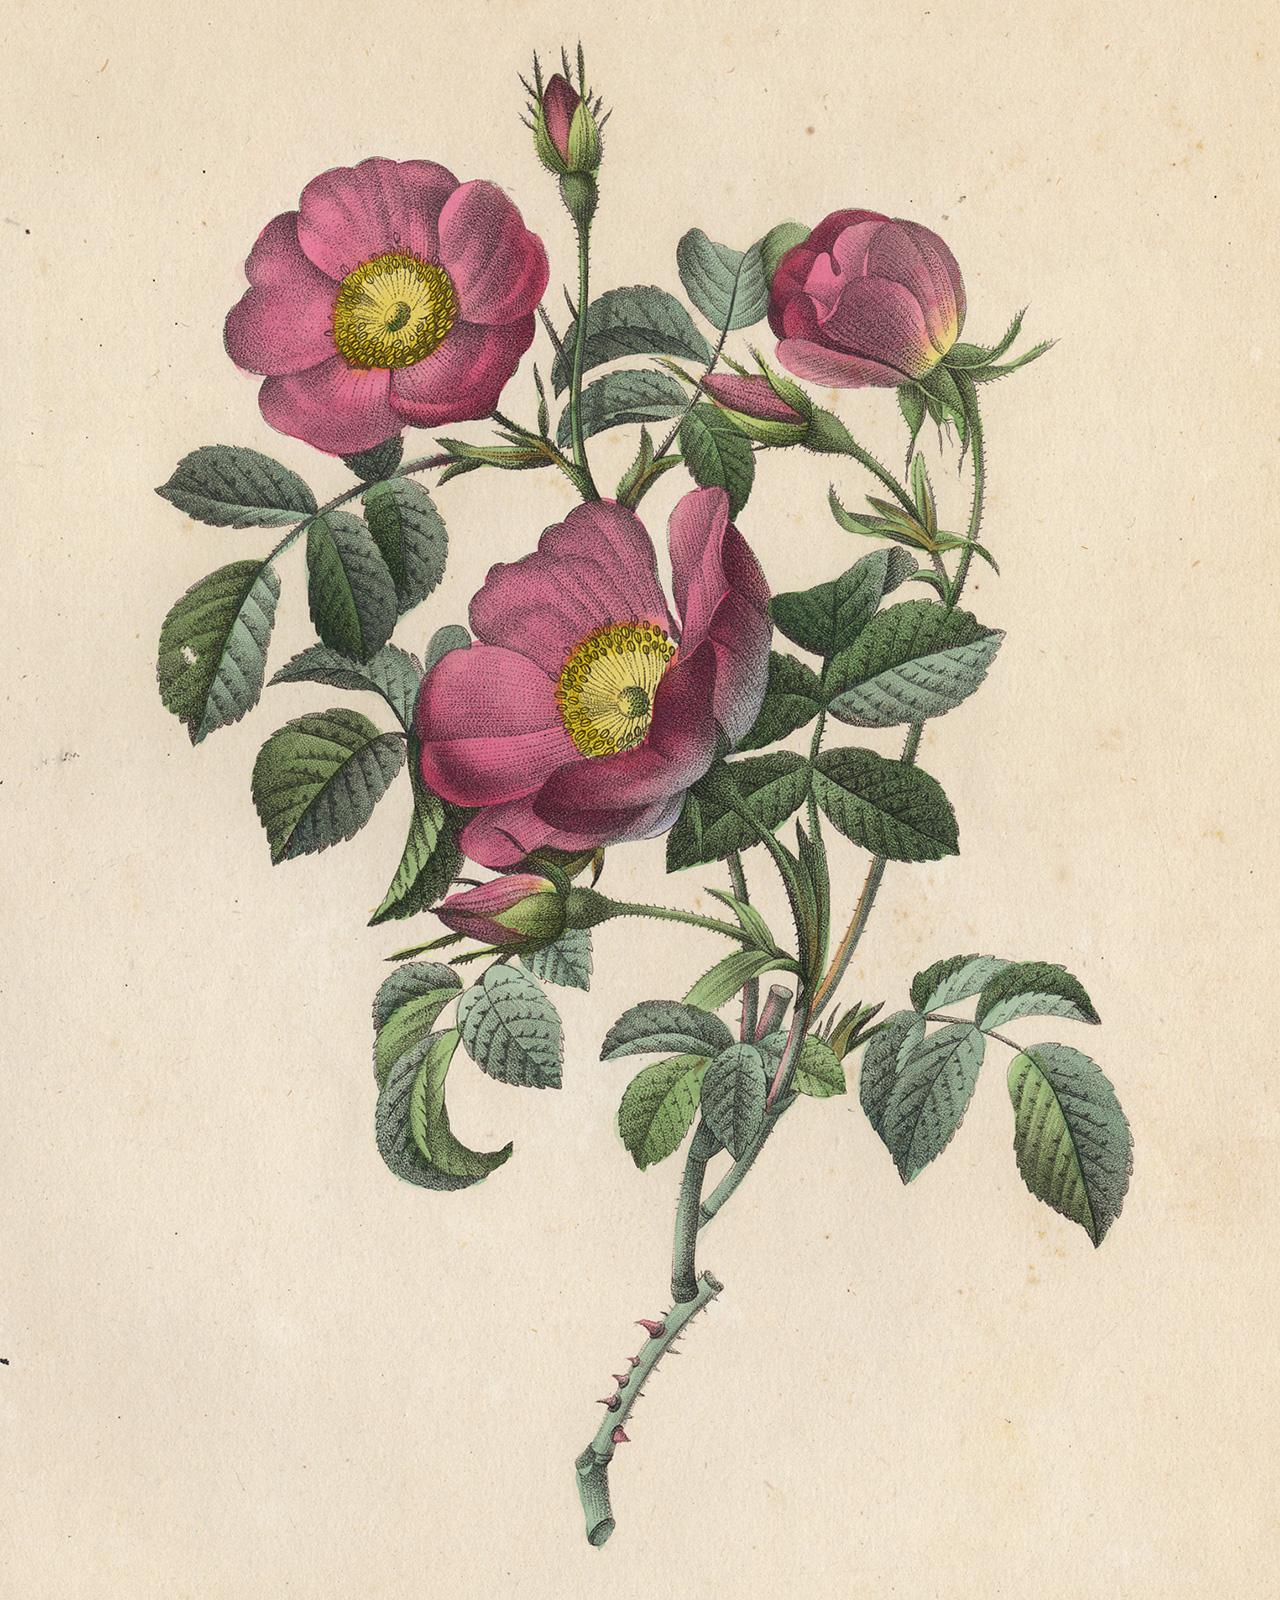 Creeping French Rose by Redoute - Handcoloured engraving - 19th century - Print by Pierre-Joseph Redouté